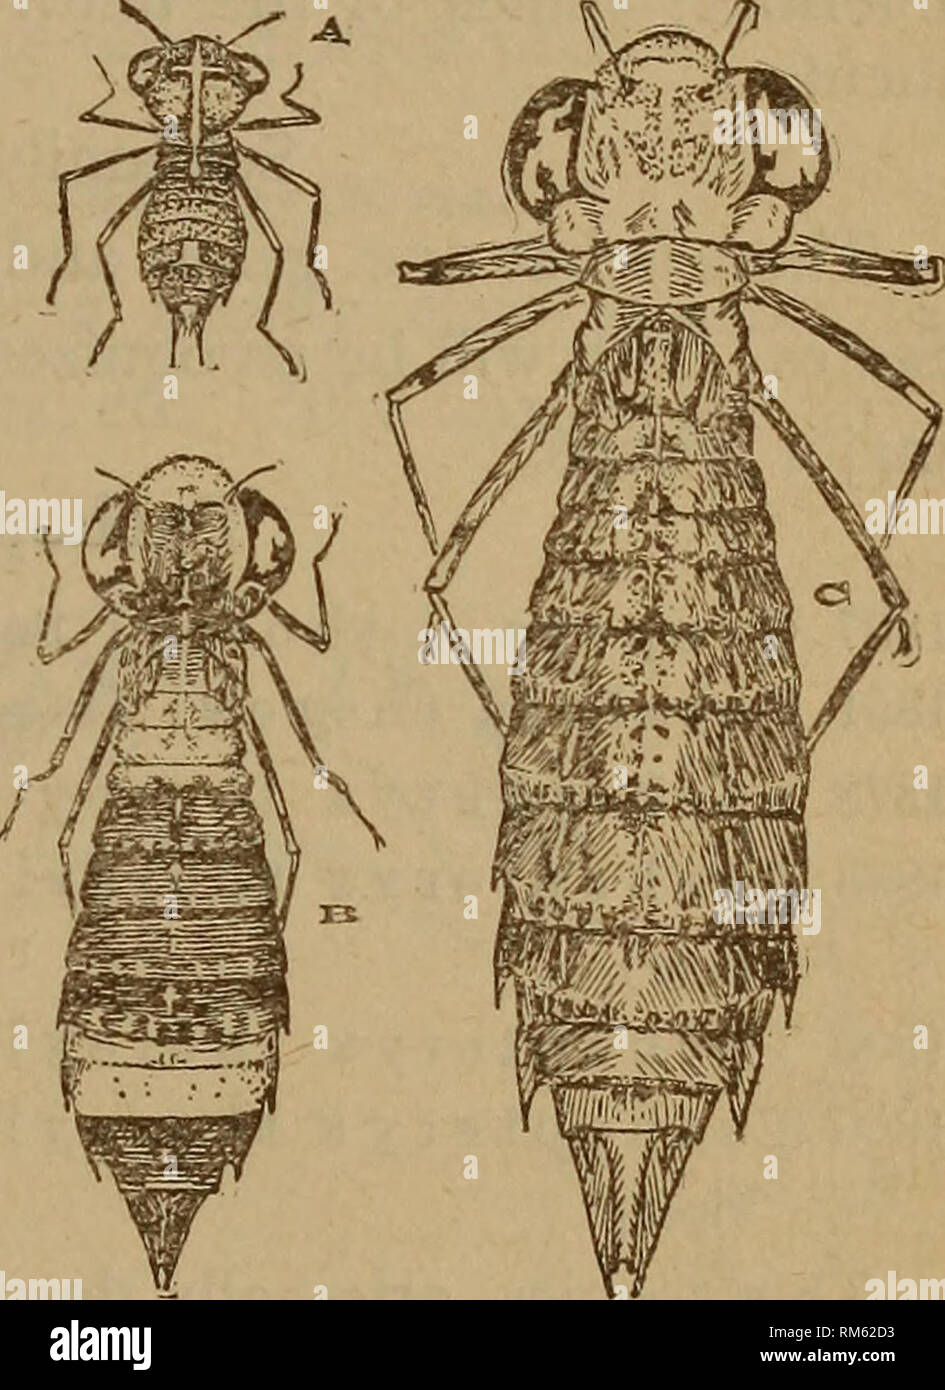 . Annual report of the Regents. New York State Museum; Science. AQUATIC INSECTS IN THE ADIRONDACKS 471 1890 Anax Junius Hagen, Psyche, 5 : 305 (critical account of the species) 1893 Auax Junius Calvert, Am. ent. soc. Trans. 20: 249 (description) 1897 Anax Junius Calvert, N. Y. ent. soc. Jour. 3: 46 and 5 : 93 (listed from New York, Ithaca, Schoharie and Buffalo) 1899 Anax Junius Kellicott, Odon. Ohio, p. 77 1900 Anax Junius Williamson, Dragon flies Ind. p. 306 1881 Anax Junius Cabot, (nymph) Mus. comp. zool. Mem. 8: 15, 36, pi. 1, fig. 2 Anax Junius Drury This well knov/n species, which is ver Stock Photo